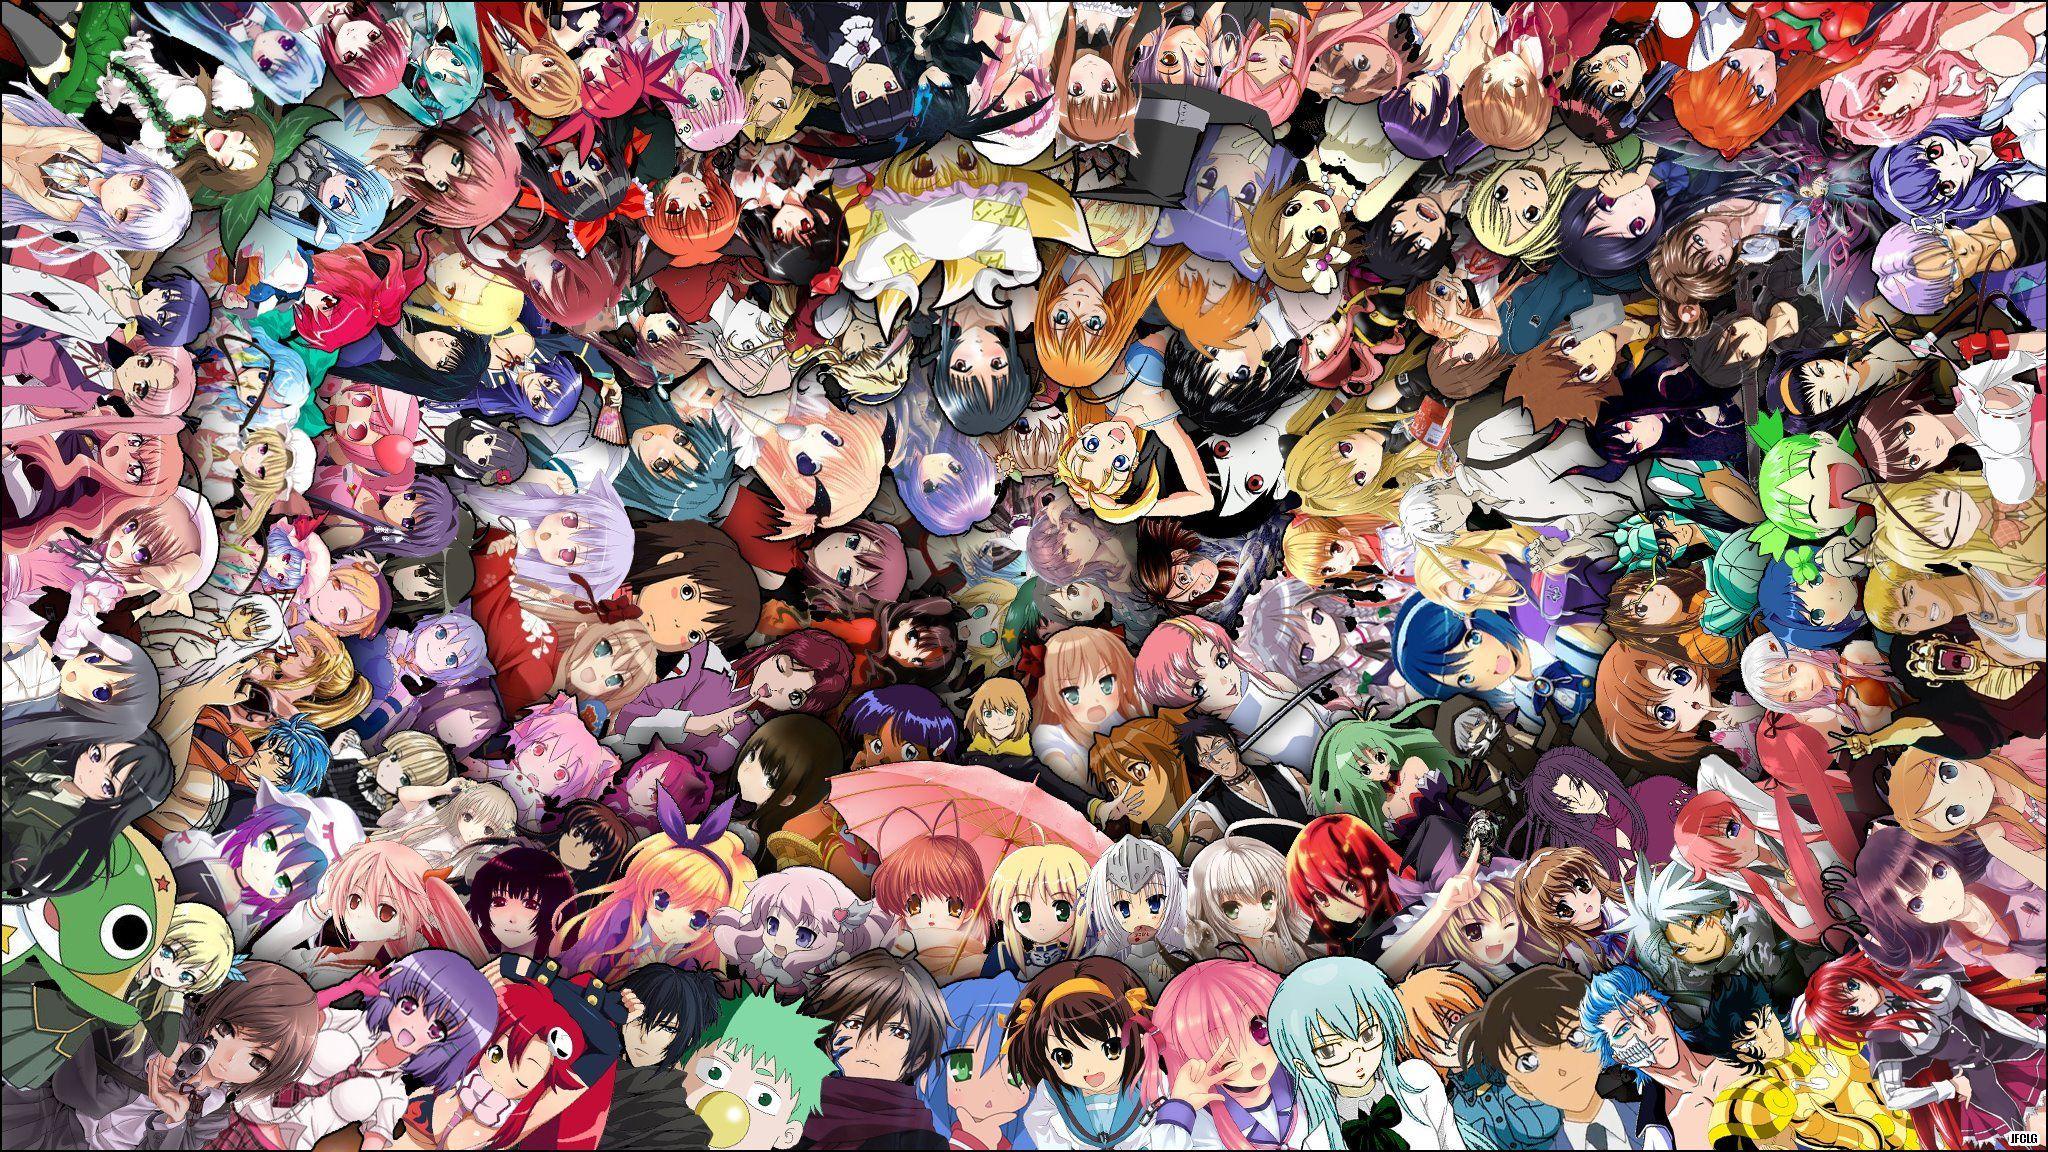 Crossover HD Wallpaper. Background. Anime wallpaper, All anime characters, Anime crossover